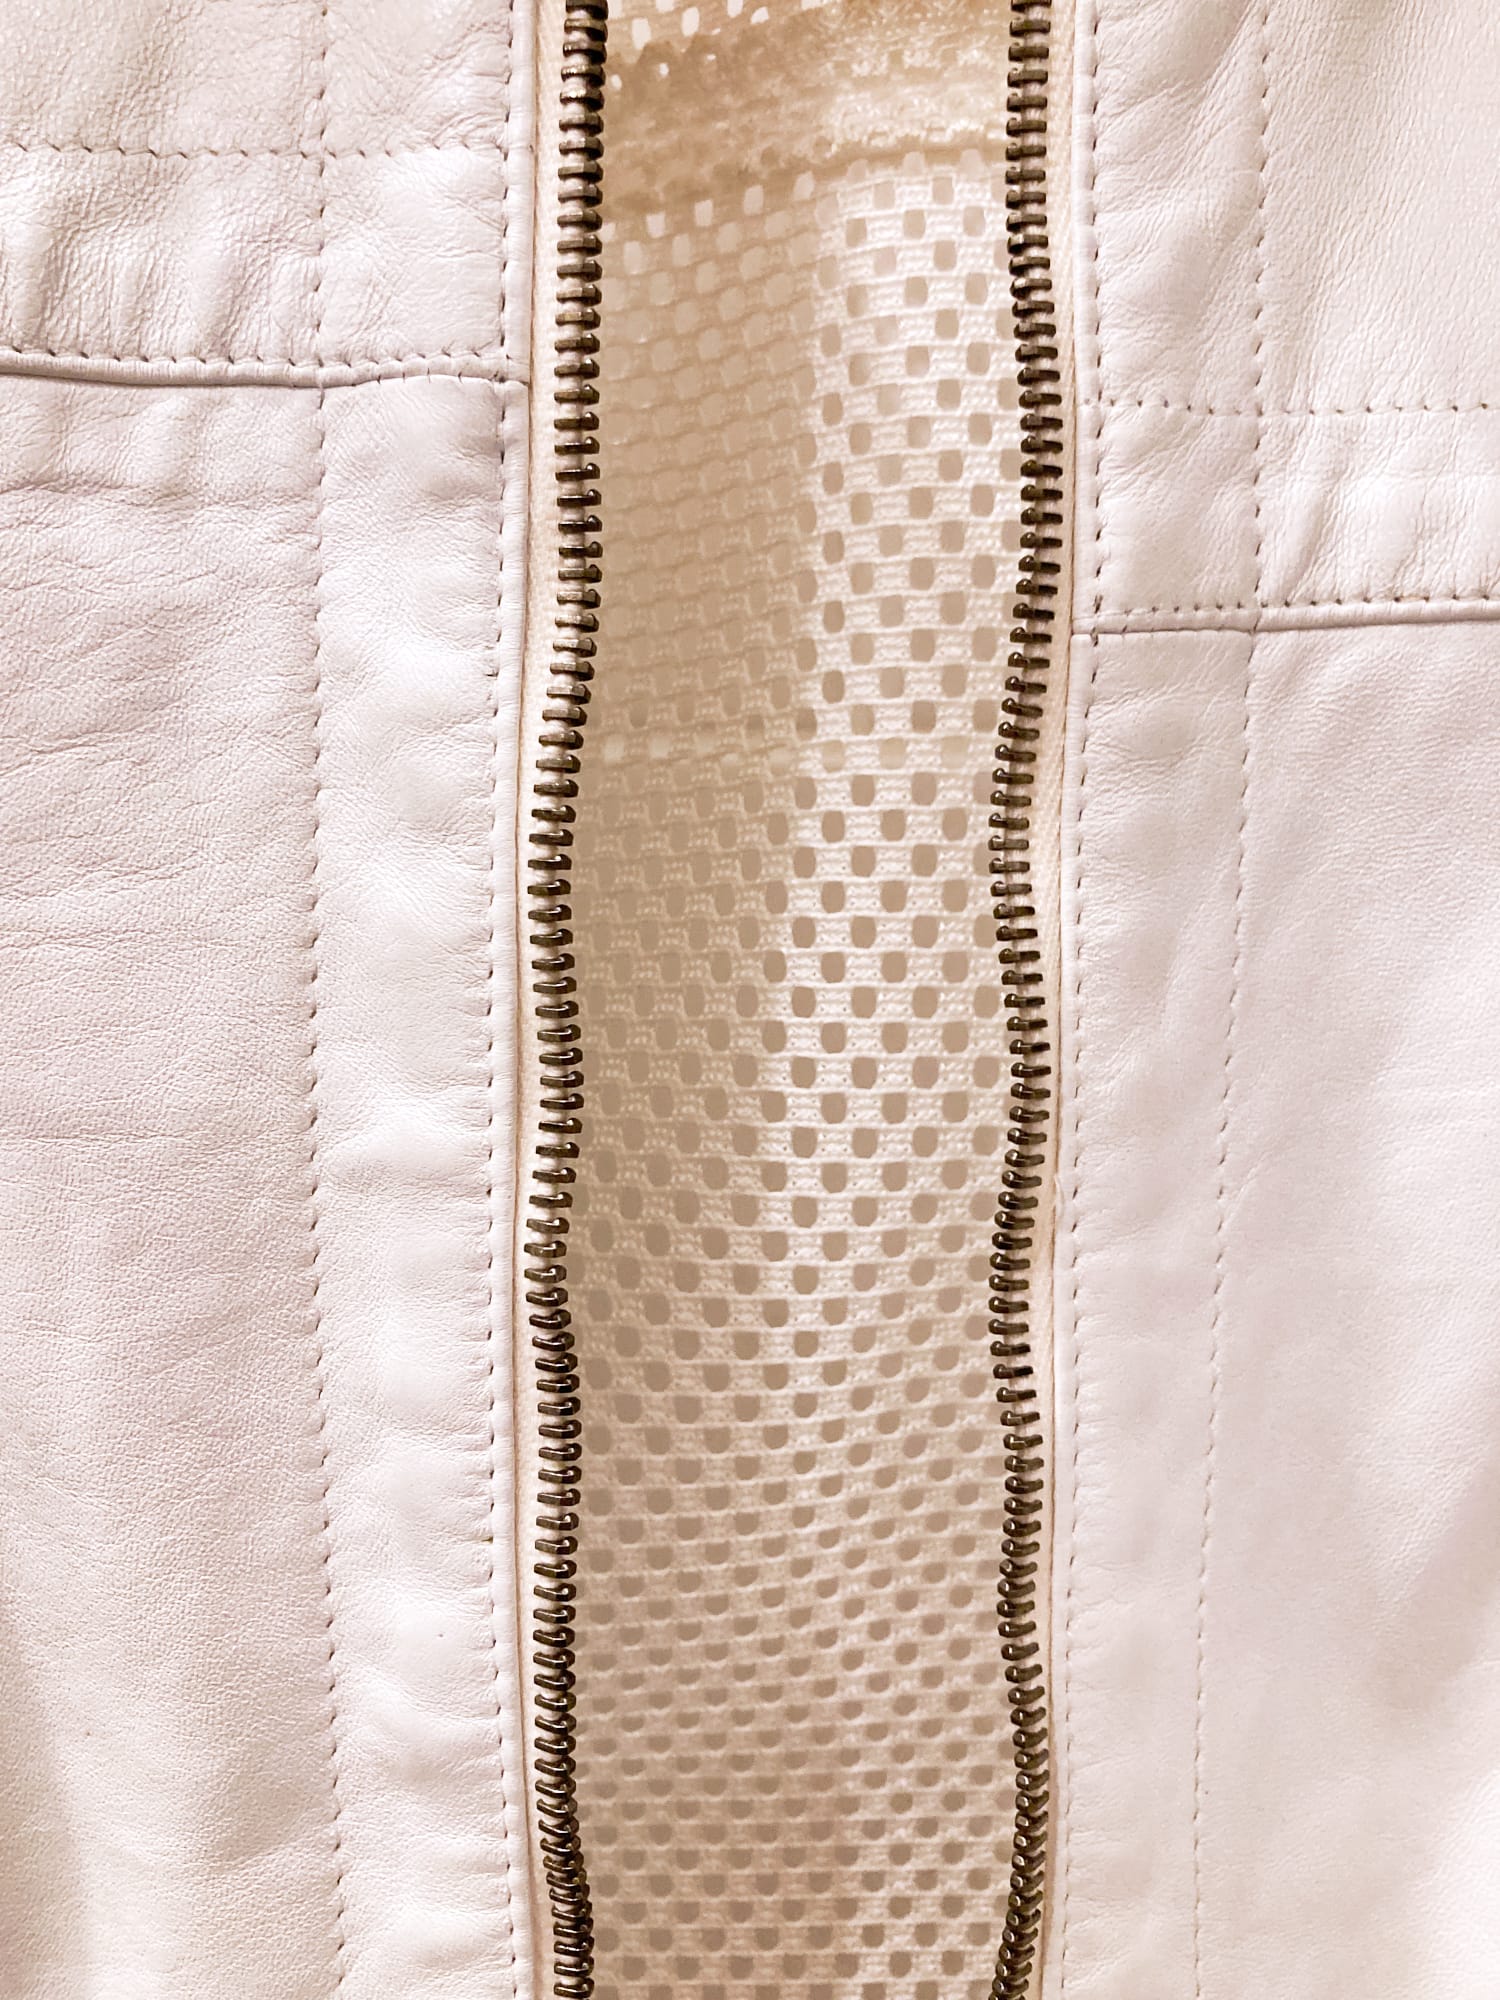 Dirk Bikkembergs spring 1996 white leather jacket with mesh back